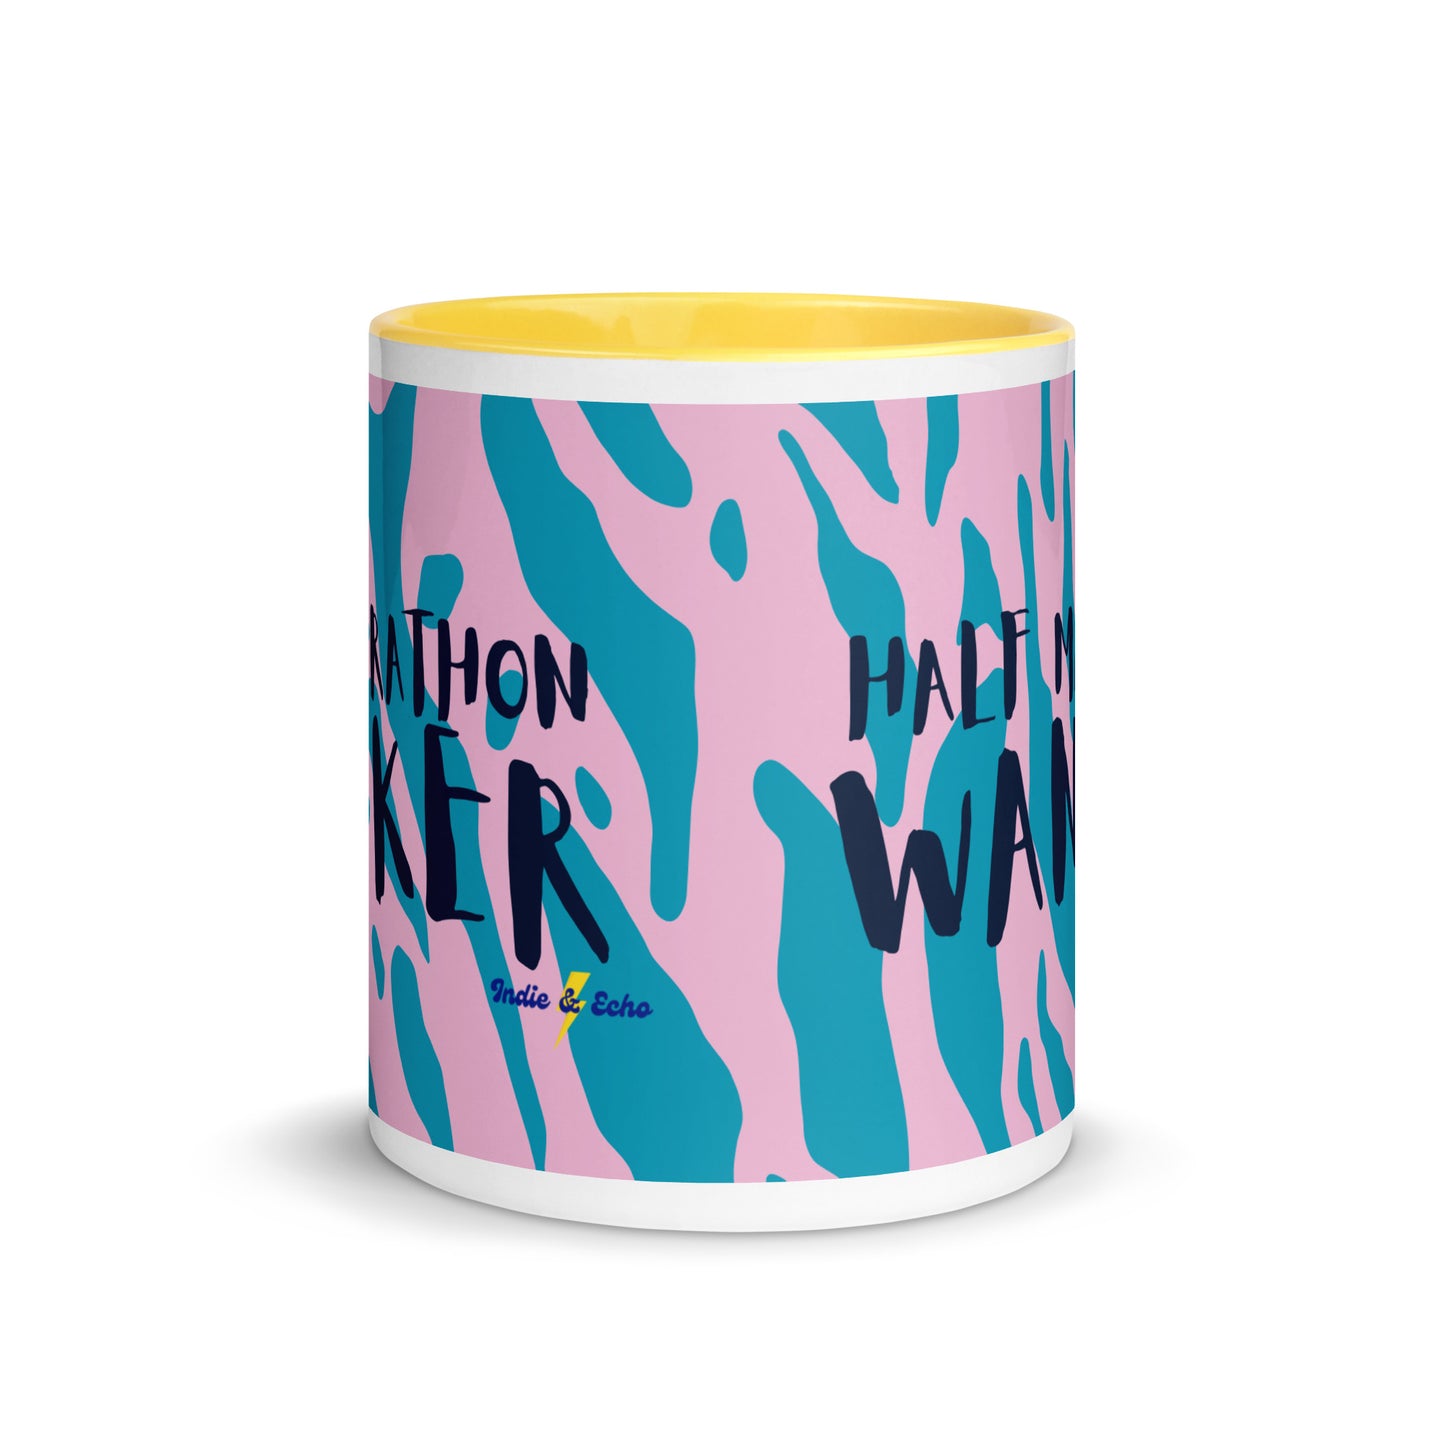 yellow and white mug with half marathon wanker written across the side, with a blue and pink animal print background